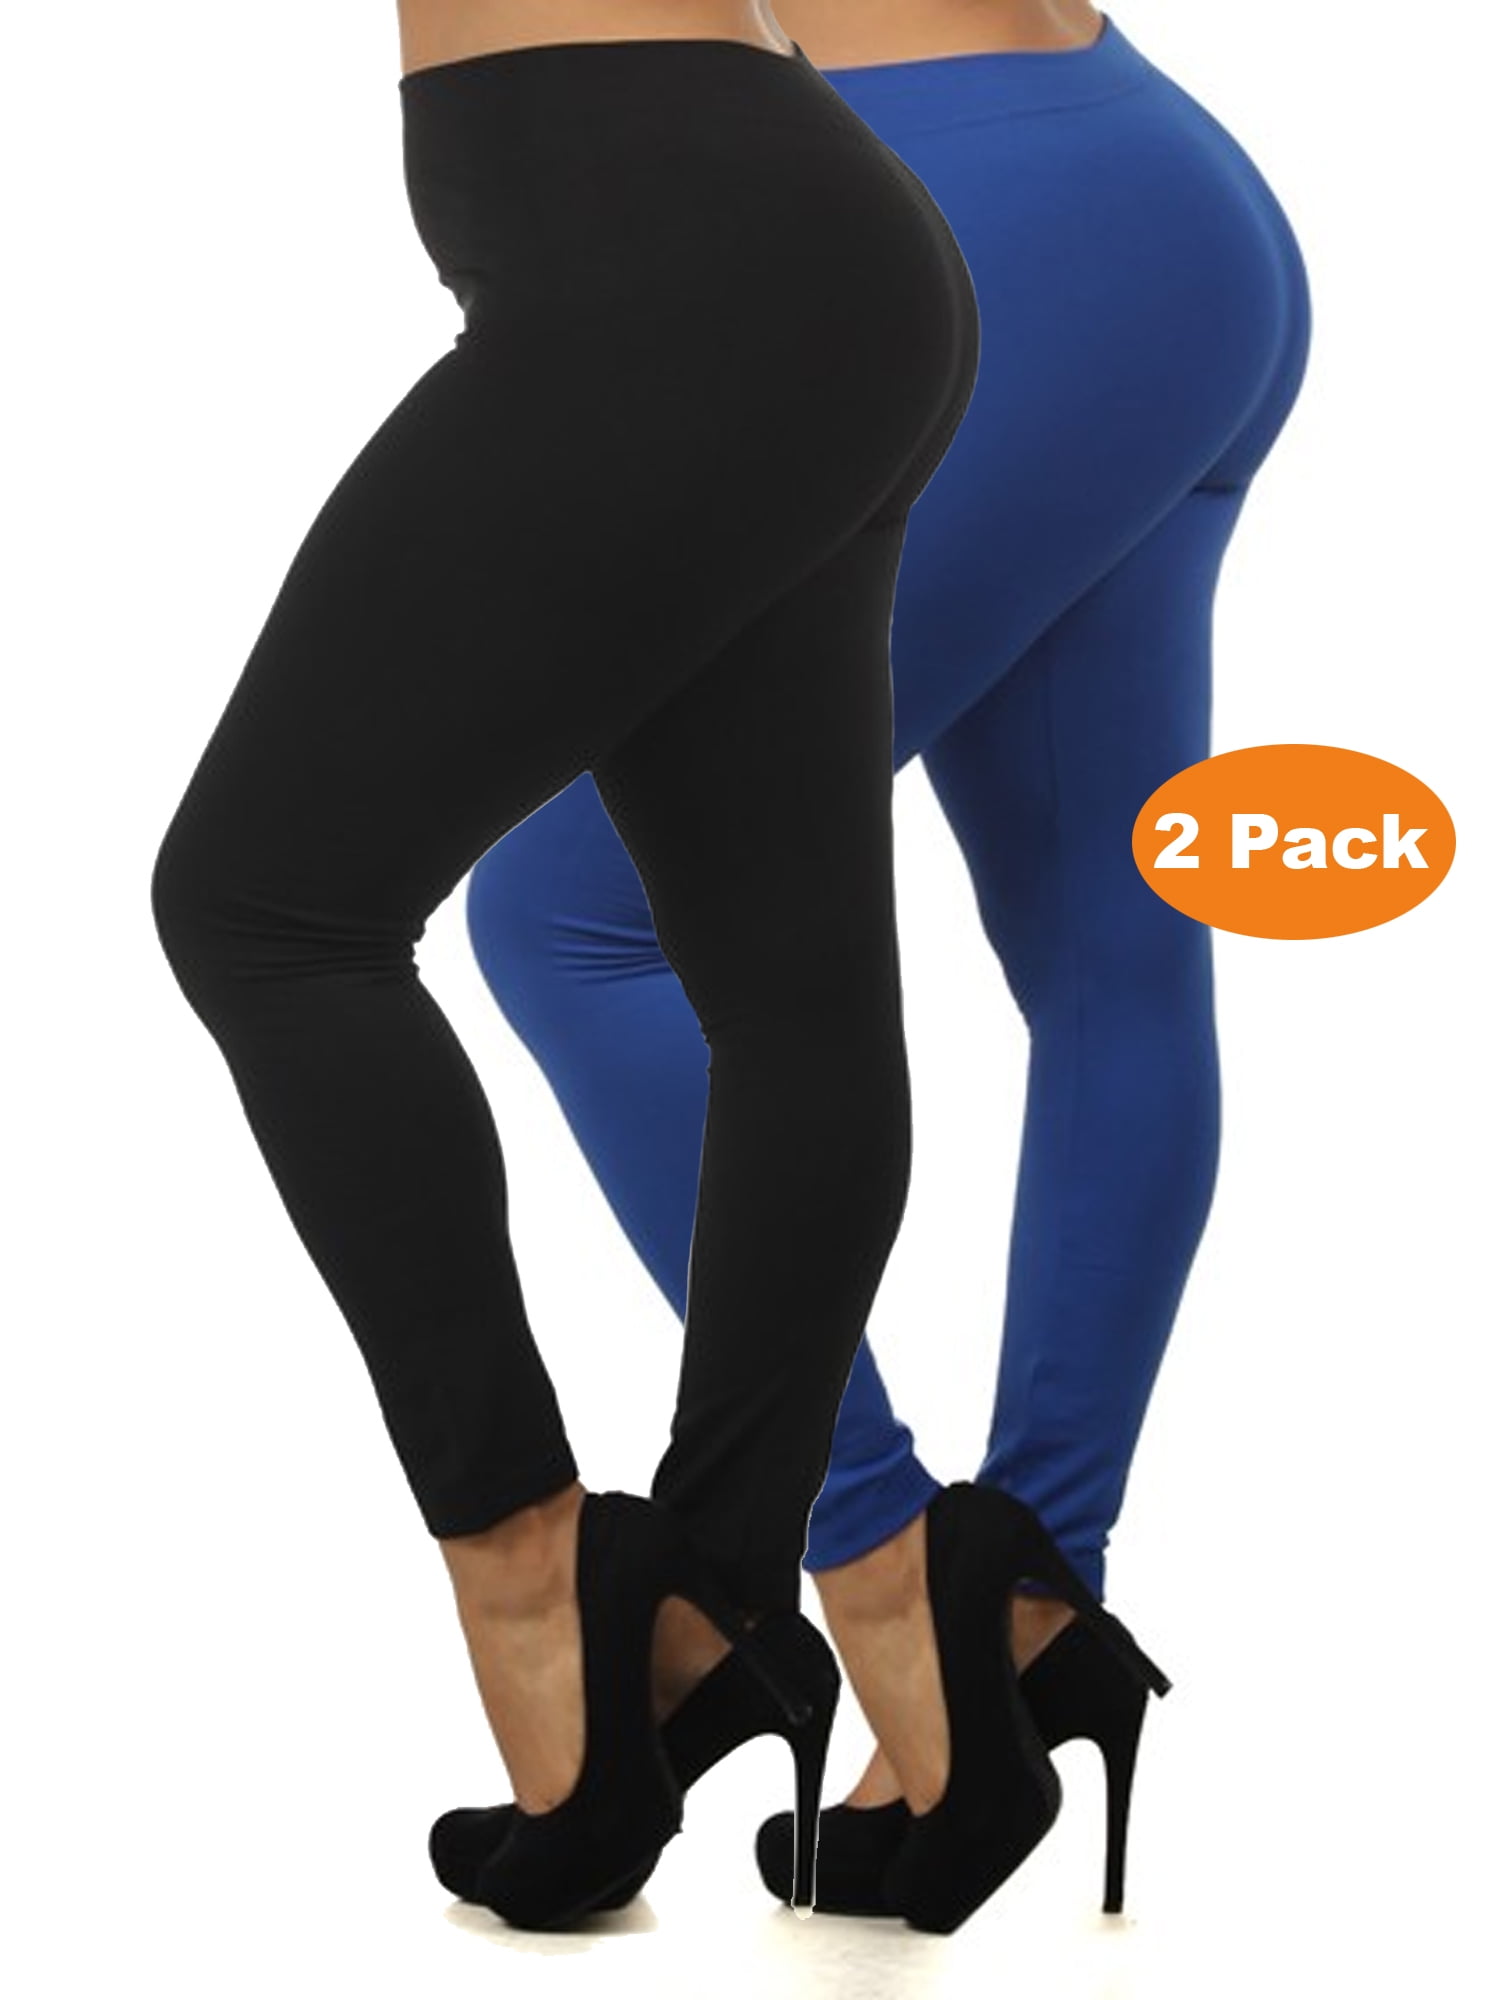 High-Waisted Lace Seamless Legging